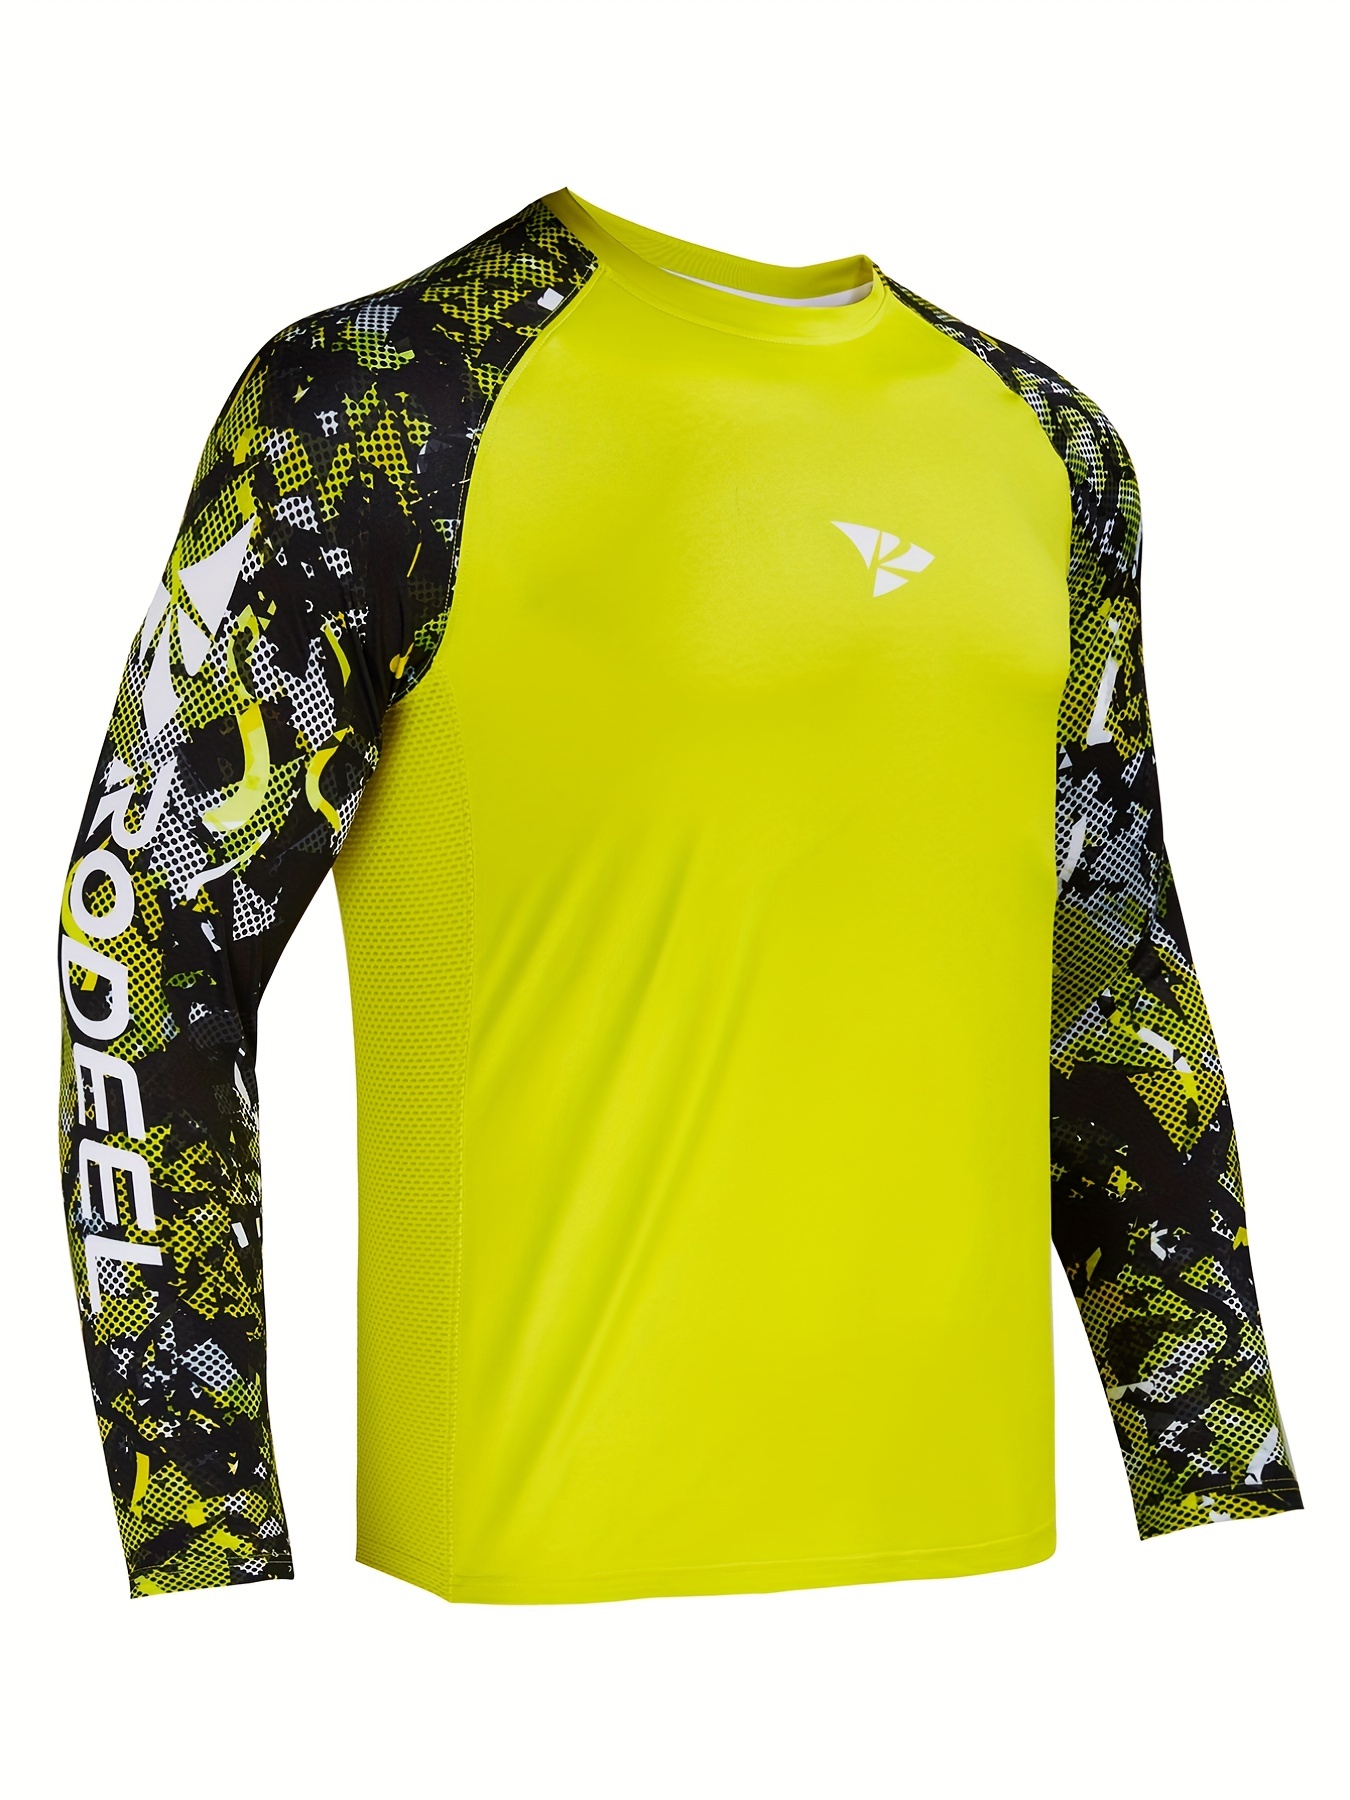 Performance Fishing Shirt Vented Long Sleeve Shirt Sun Protection UPF50  Moisture Wicking Rash Guard with Mesh Sides Loose Fit - yellow - S :  : Fashion